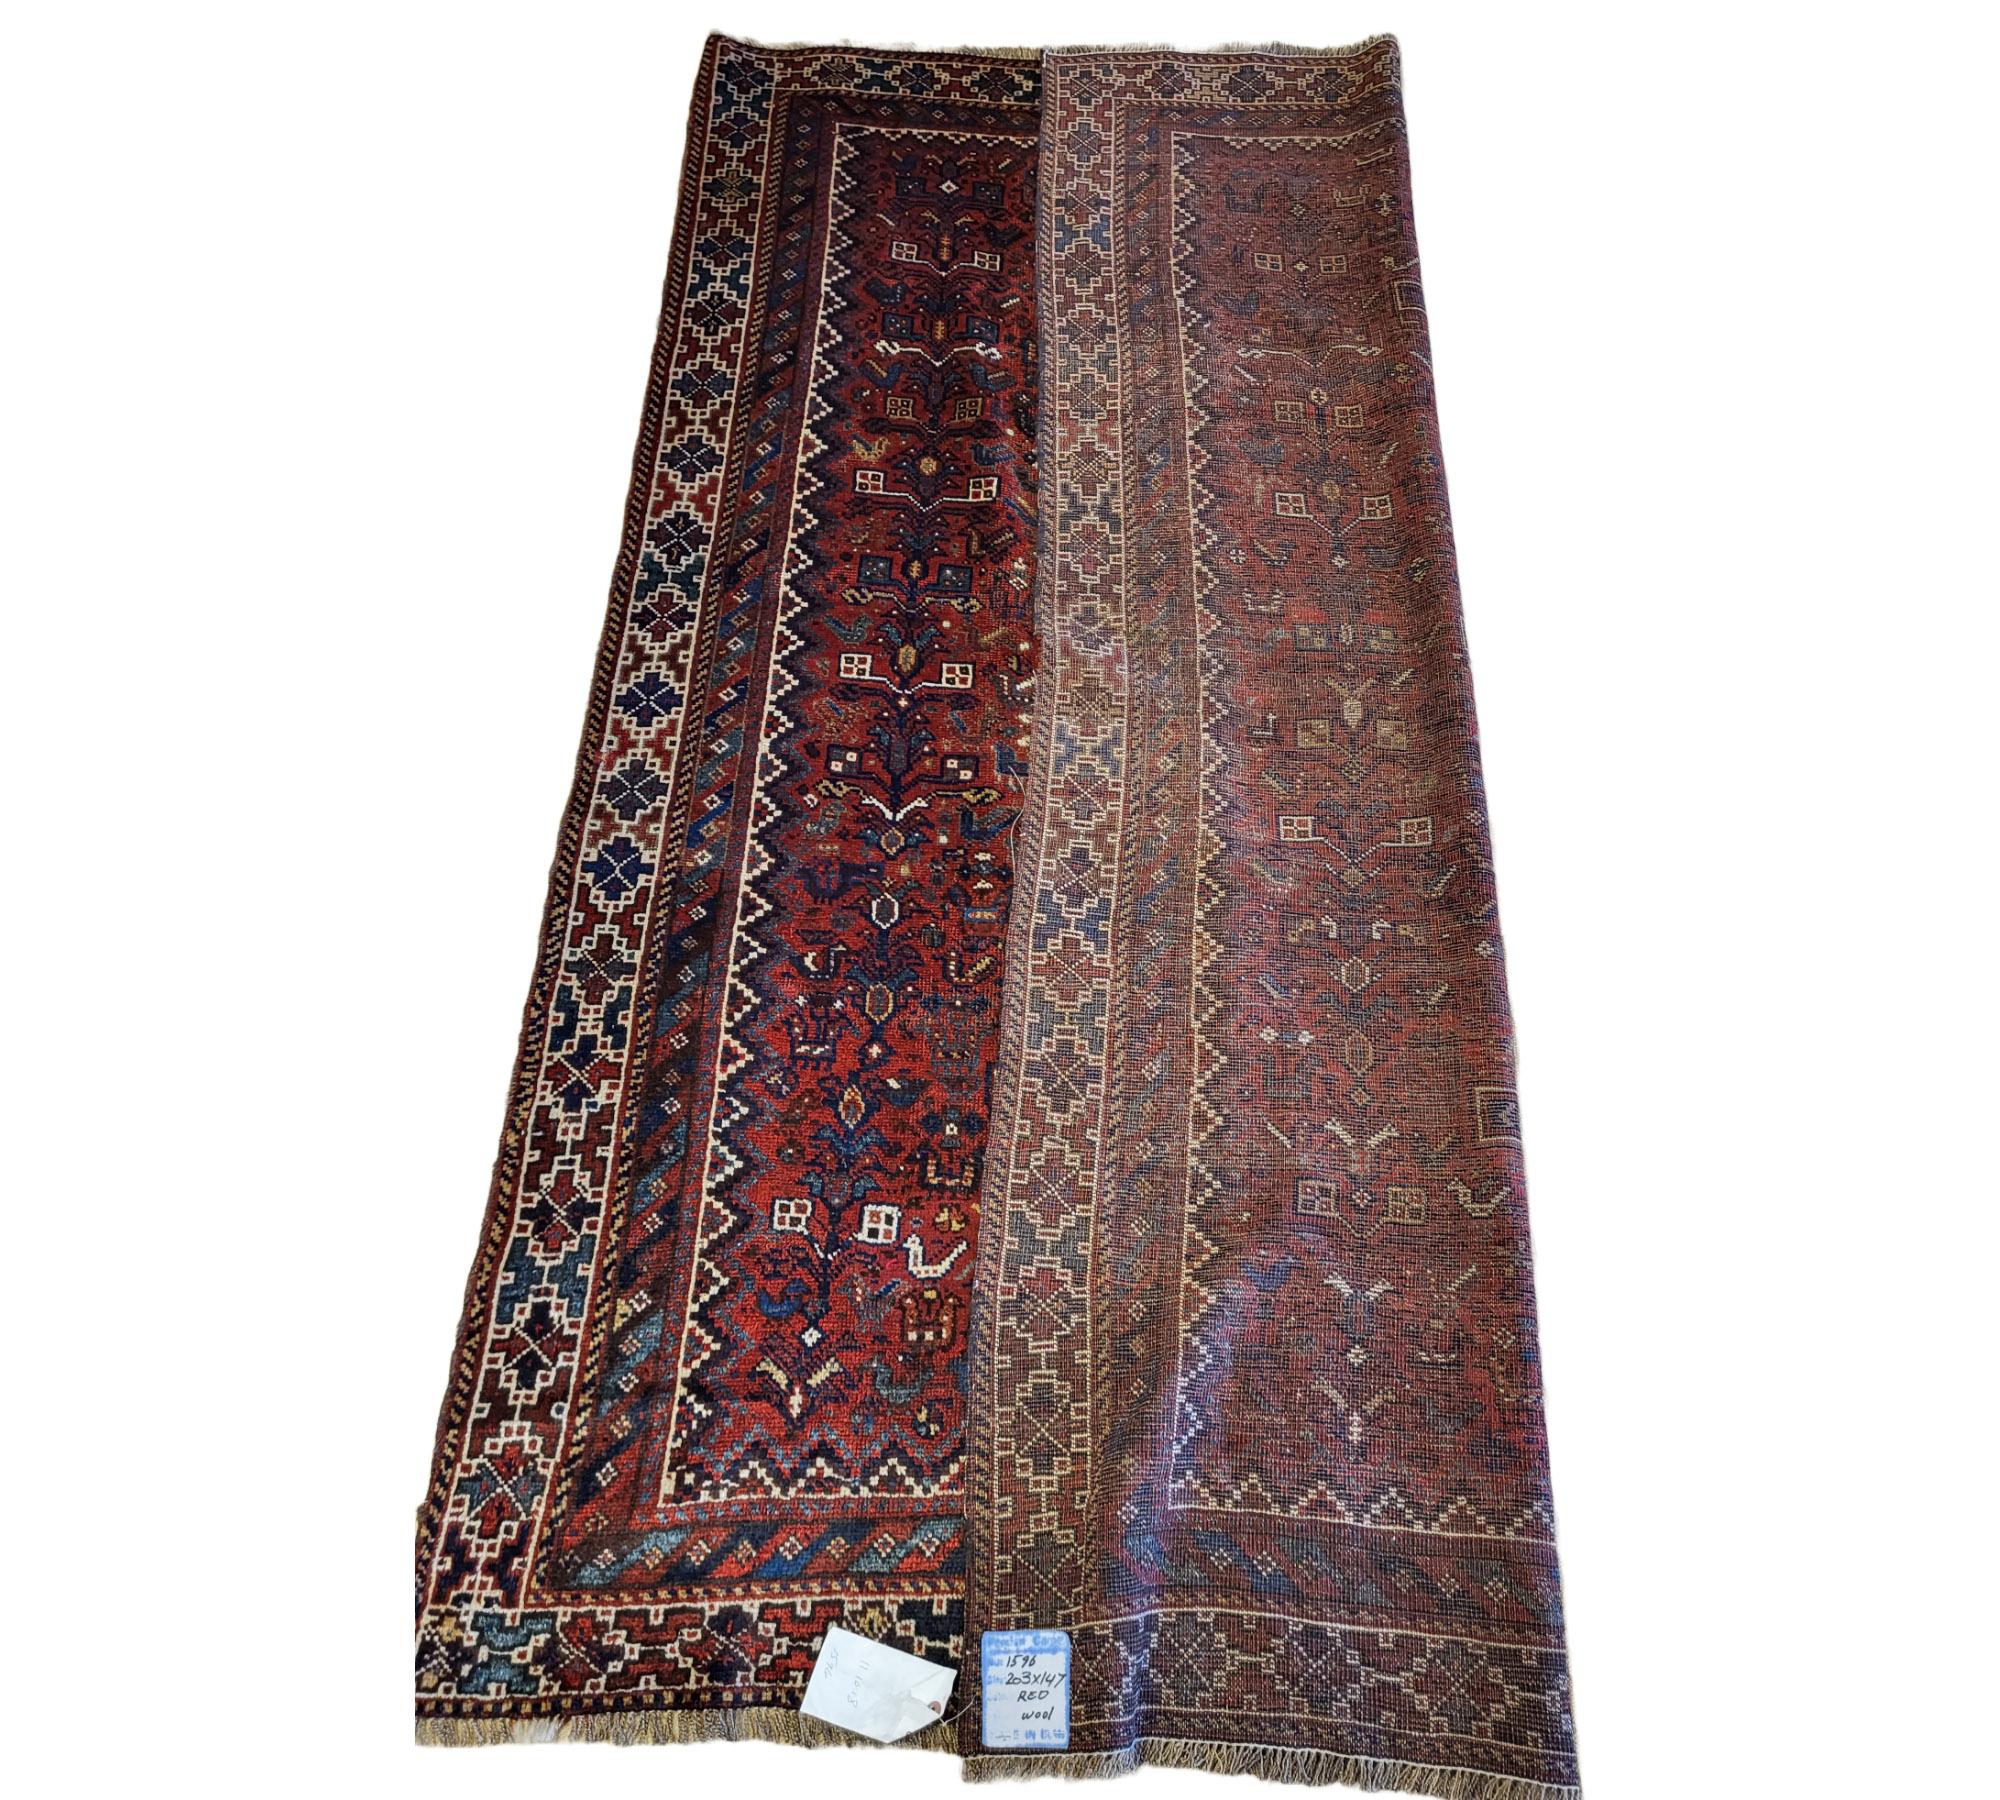 Incredible 1850's Persian Qashqai

Hand knotted Persian wool, sheared, dyed, spun, and woven by the nomadic Qashqais around the mid 1800's.

Featuring beautifully aged veggie dyes. Rich in tribal motifs indicative of its heritage- the Bauvinats of